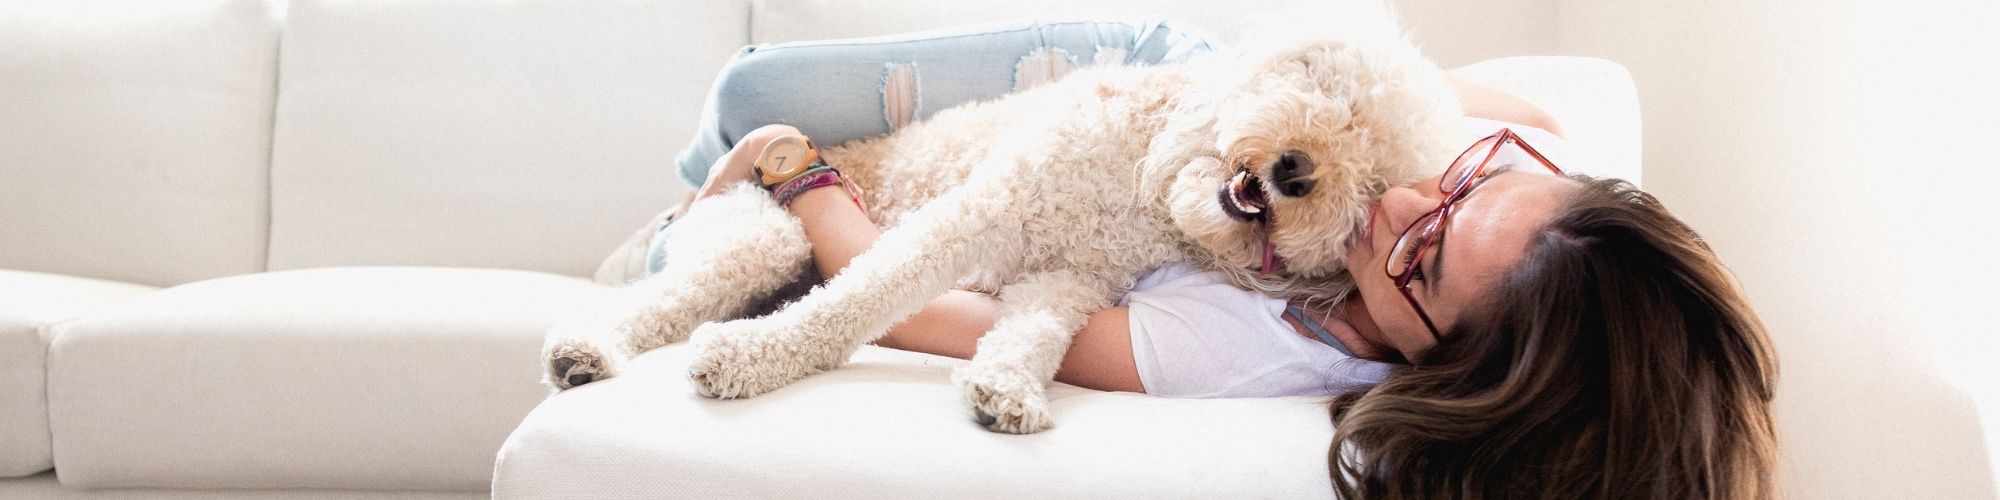 poodle cuddles with owner